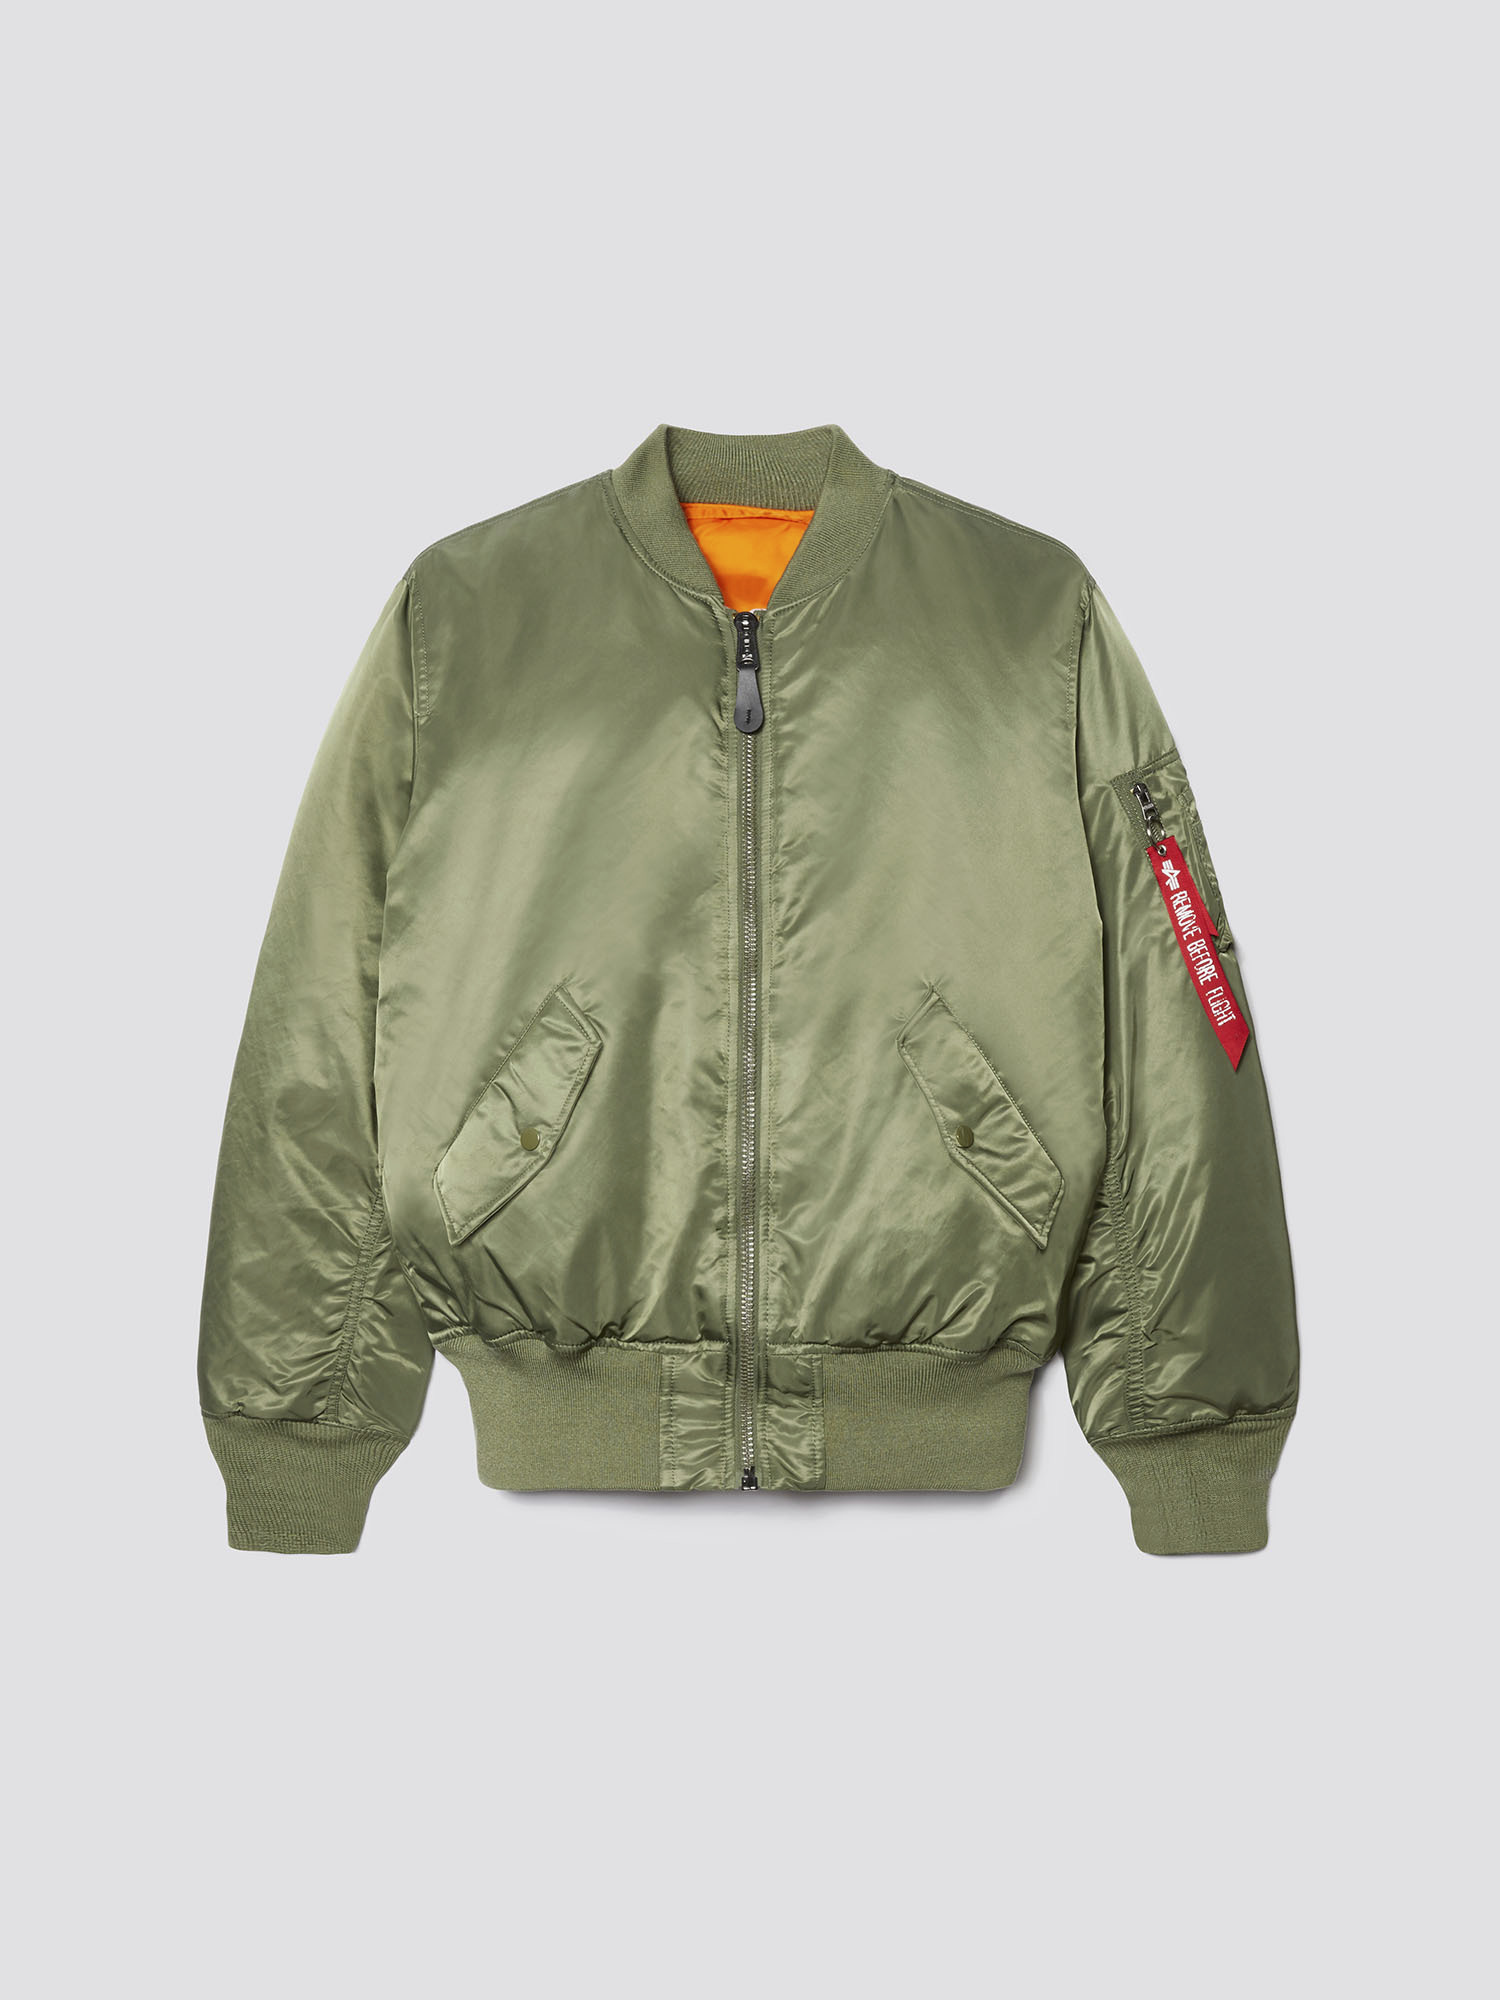 Alpha Industries – MA-1 Flight Jacket | The SHOP at the Wisconsin Veterans  Museum